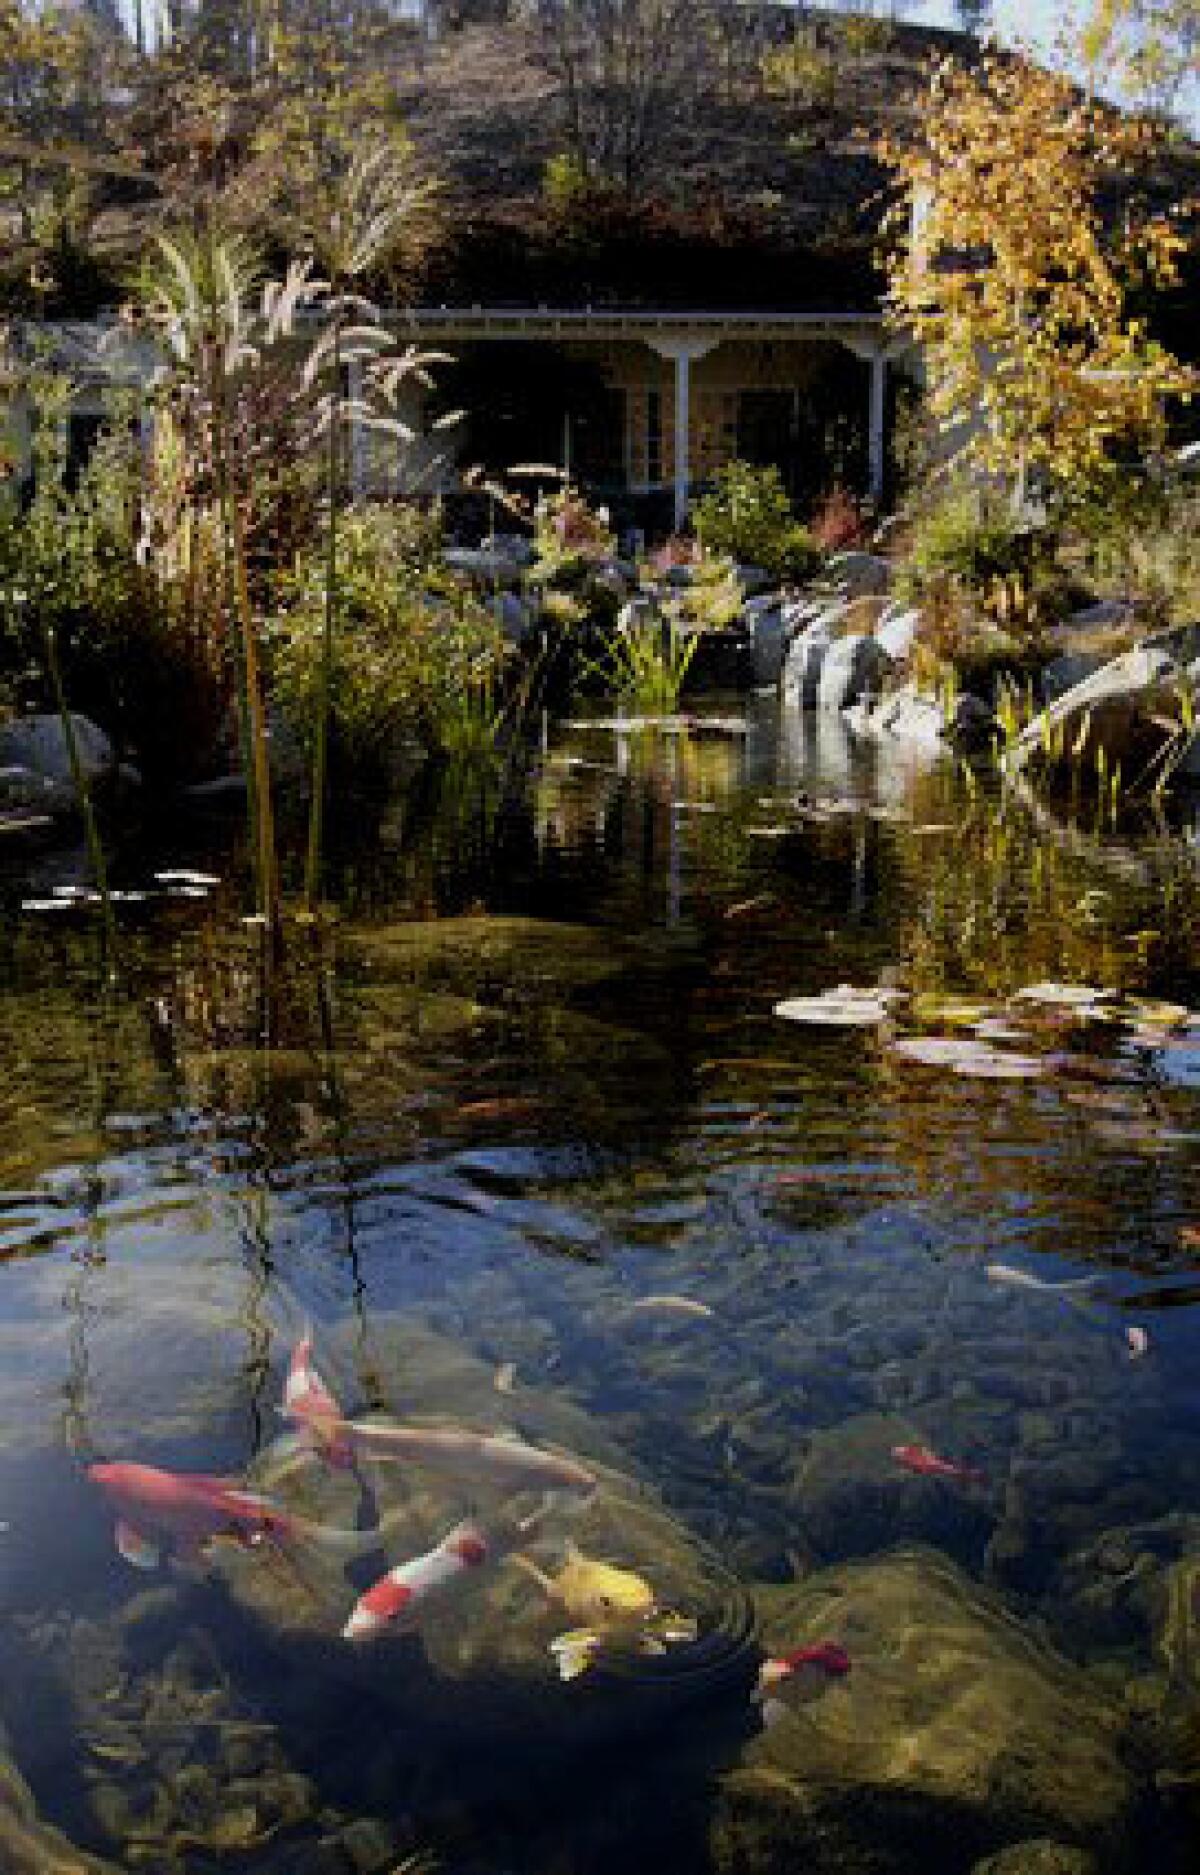 Kim and Jim Johnson have a landscaped koi pond with a waterfall in the frontyard of their Shadow Hills home. Koi signify good fortune in Asian culture; Chinese feng shui texts point out the beneficent effects of having a pond full of the bright-colored fish.